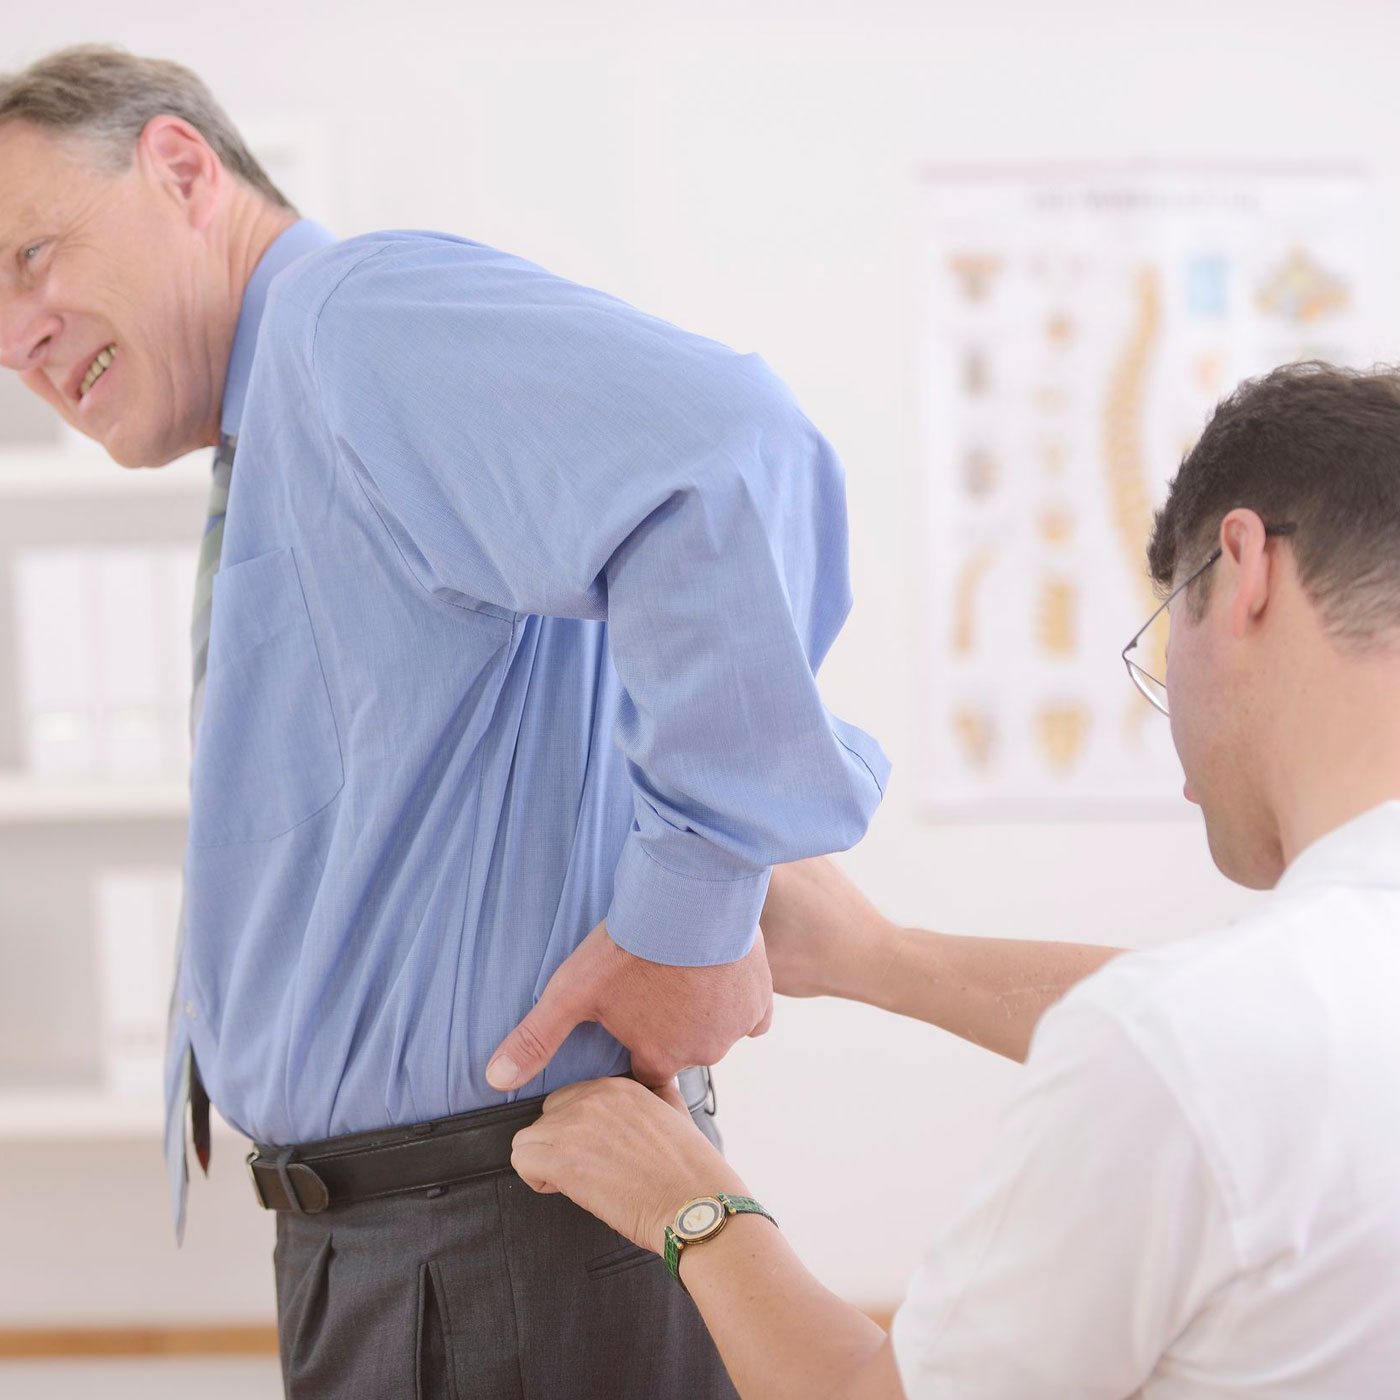 Disc Injury Treatment For Back Pain